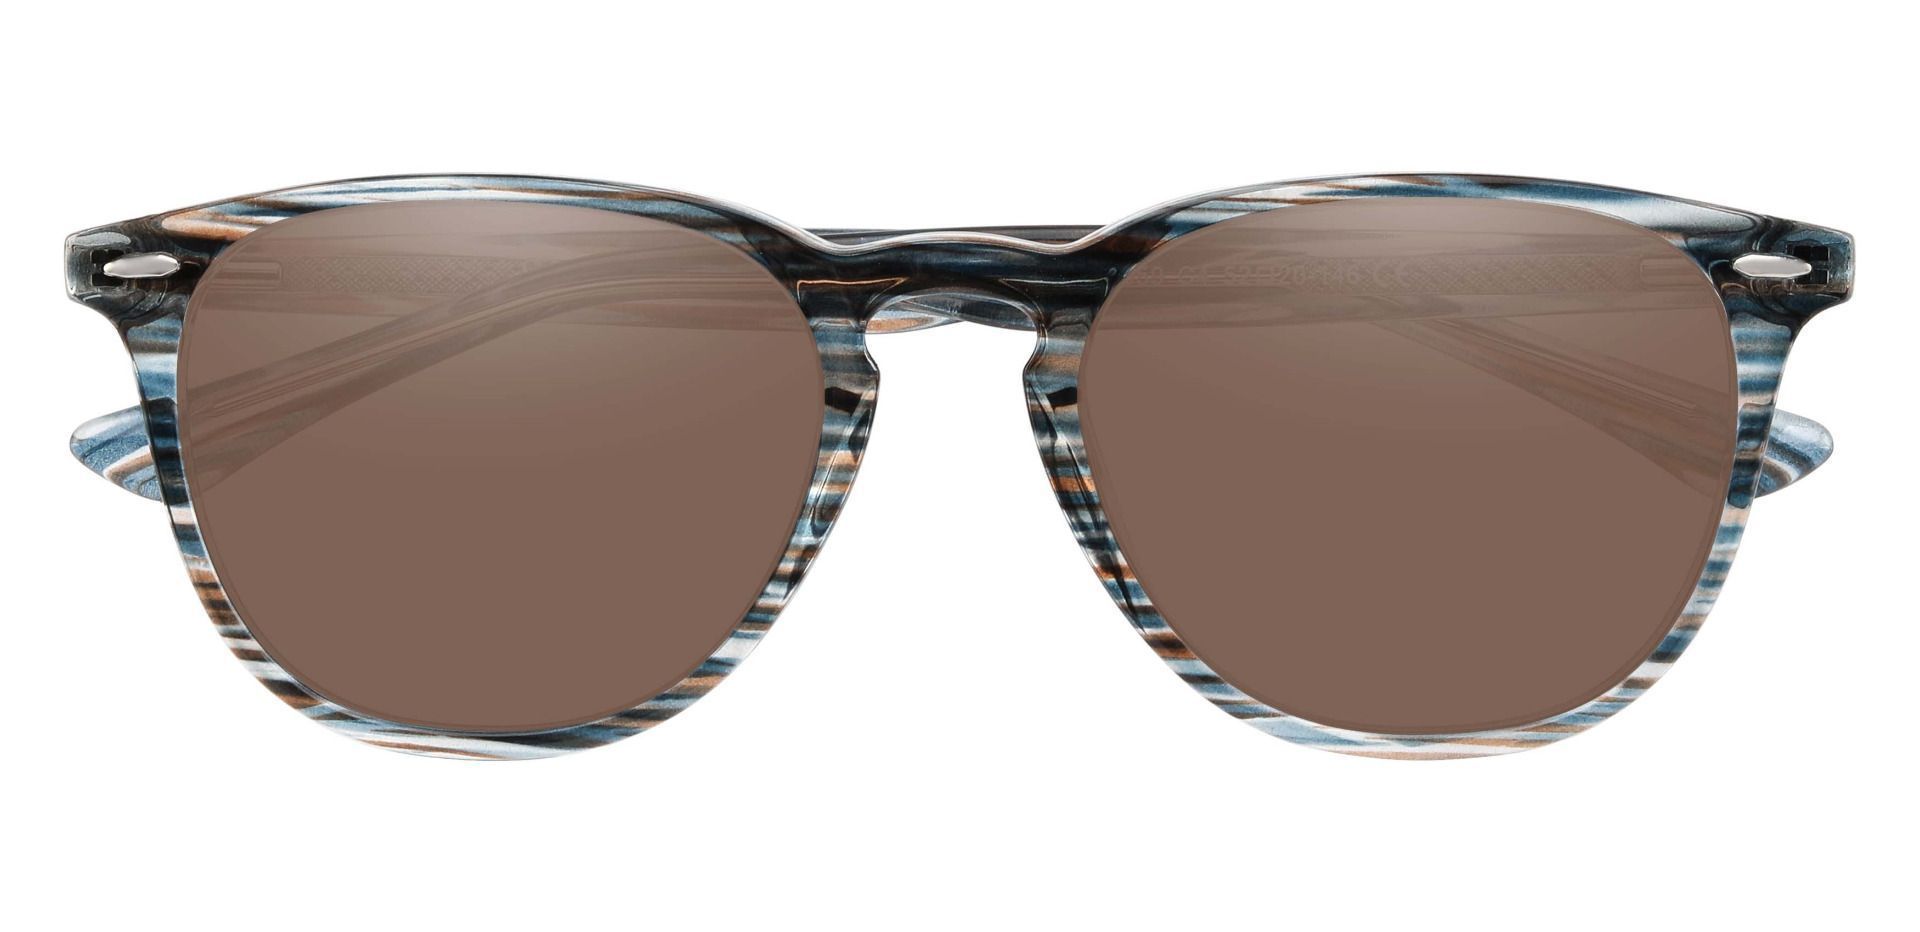 Sycamore Oval Reading Sunglasses - Blue Frame With Brown Lenses